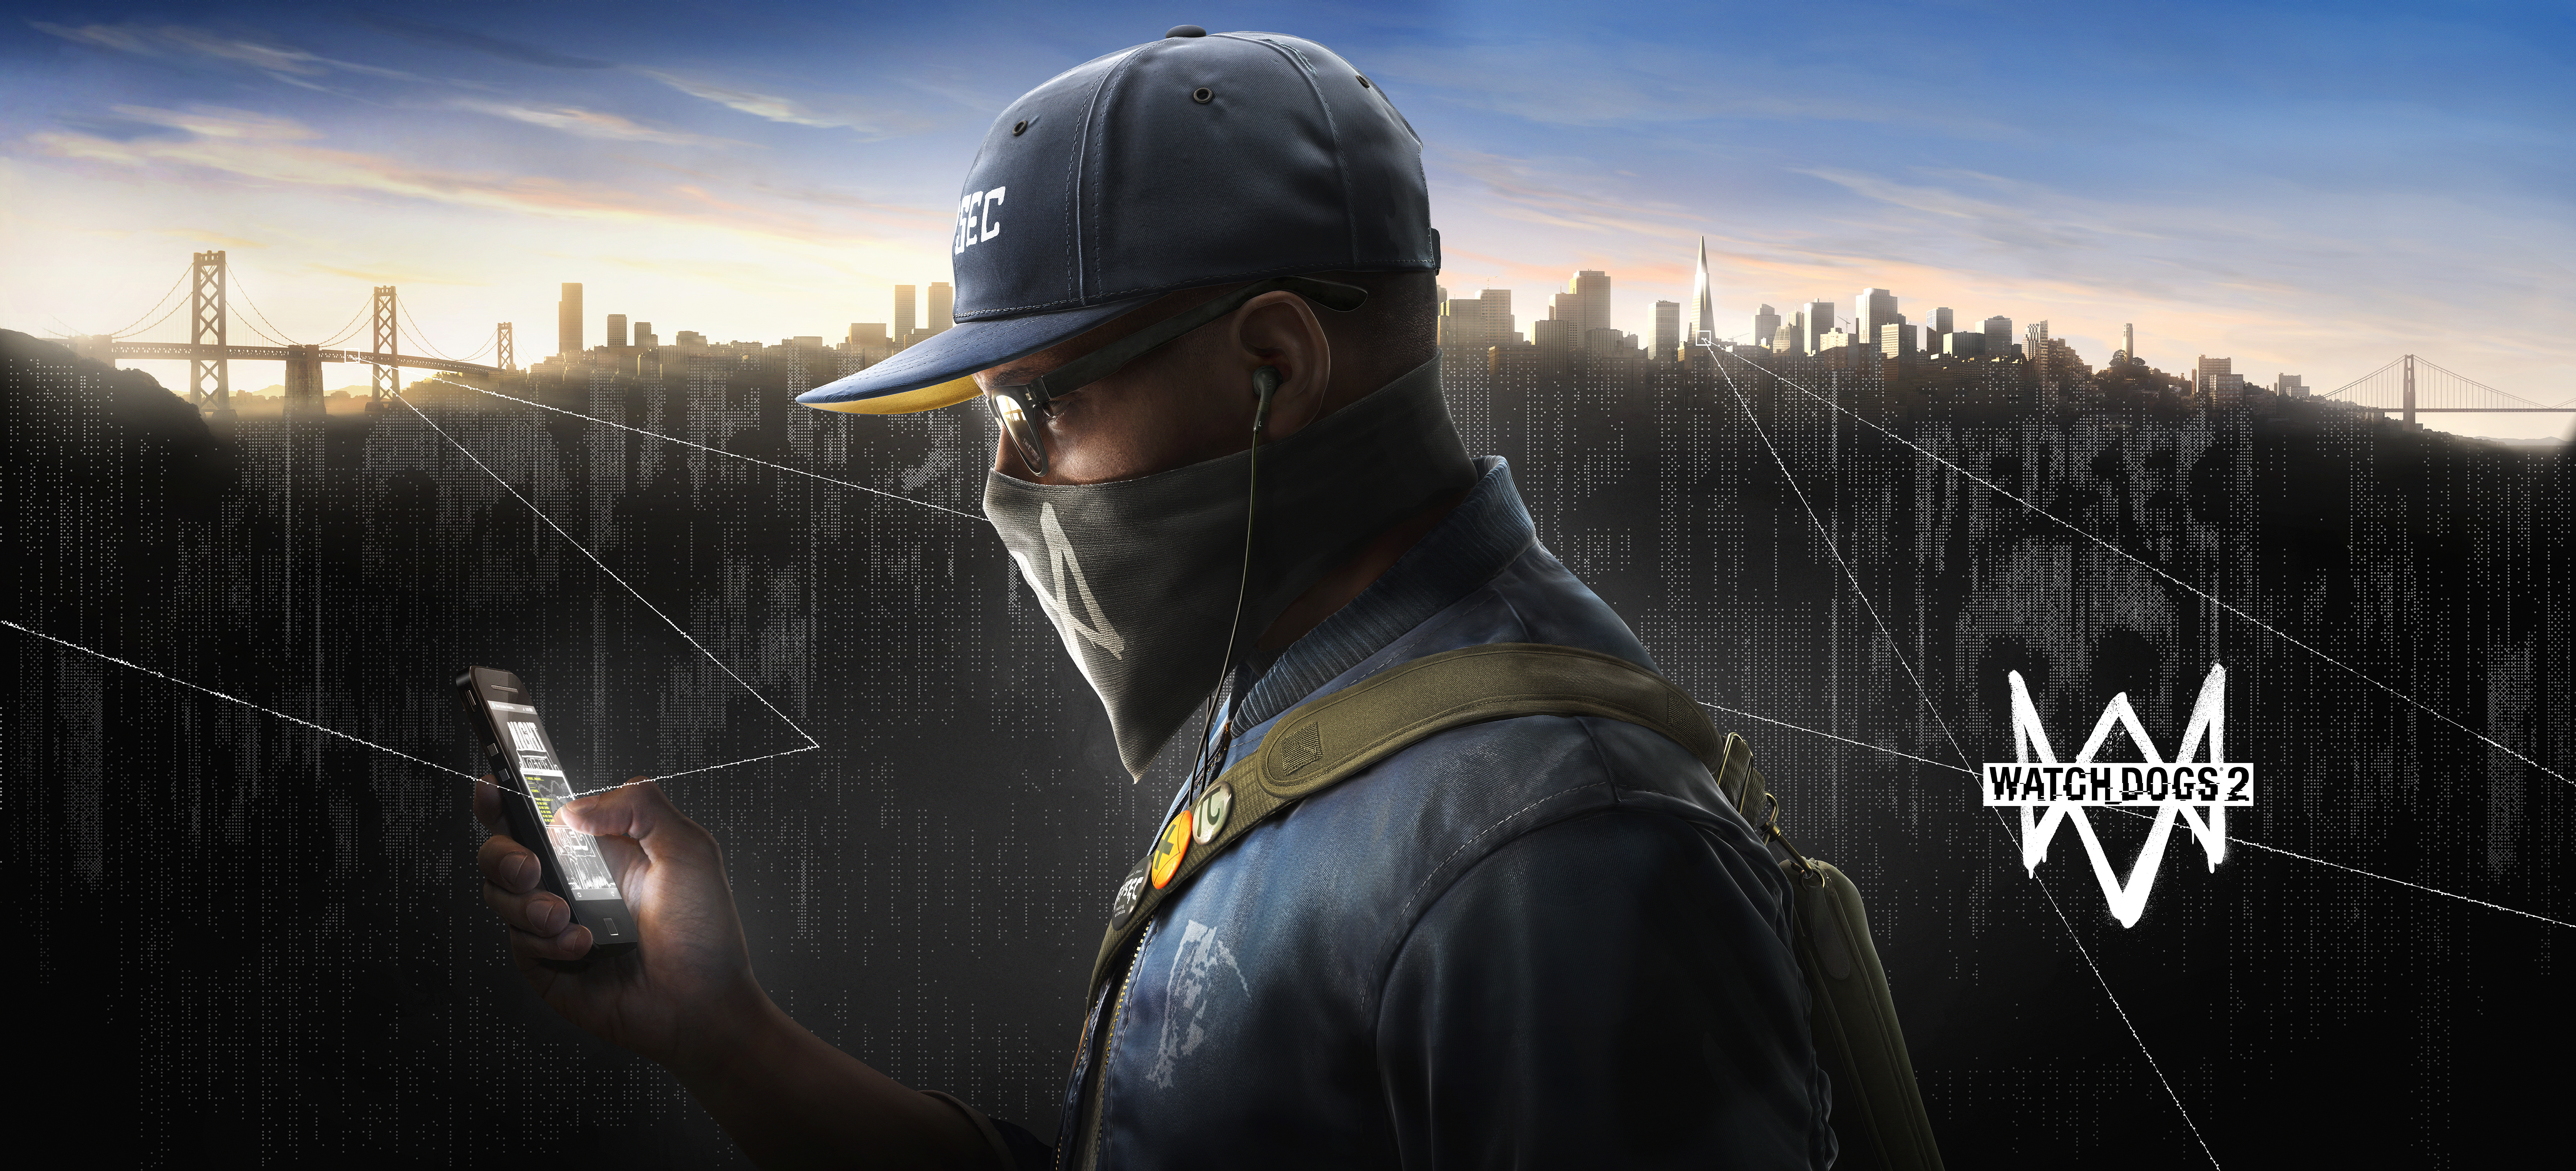 watch dogs, video game, watch dogs 2